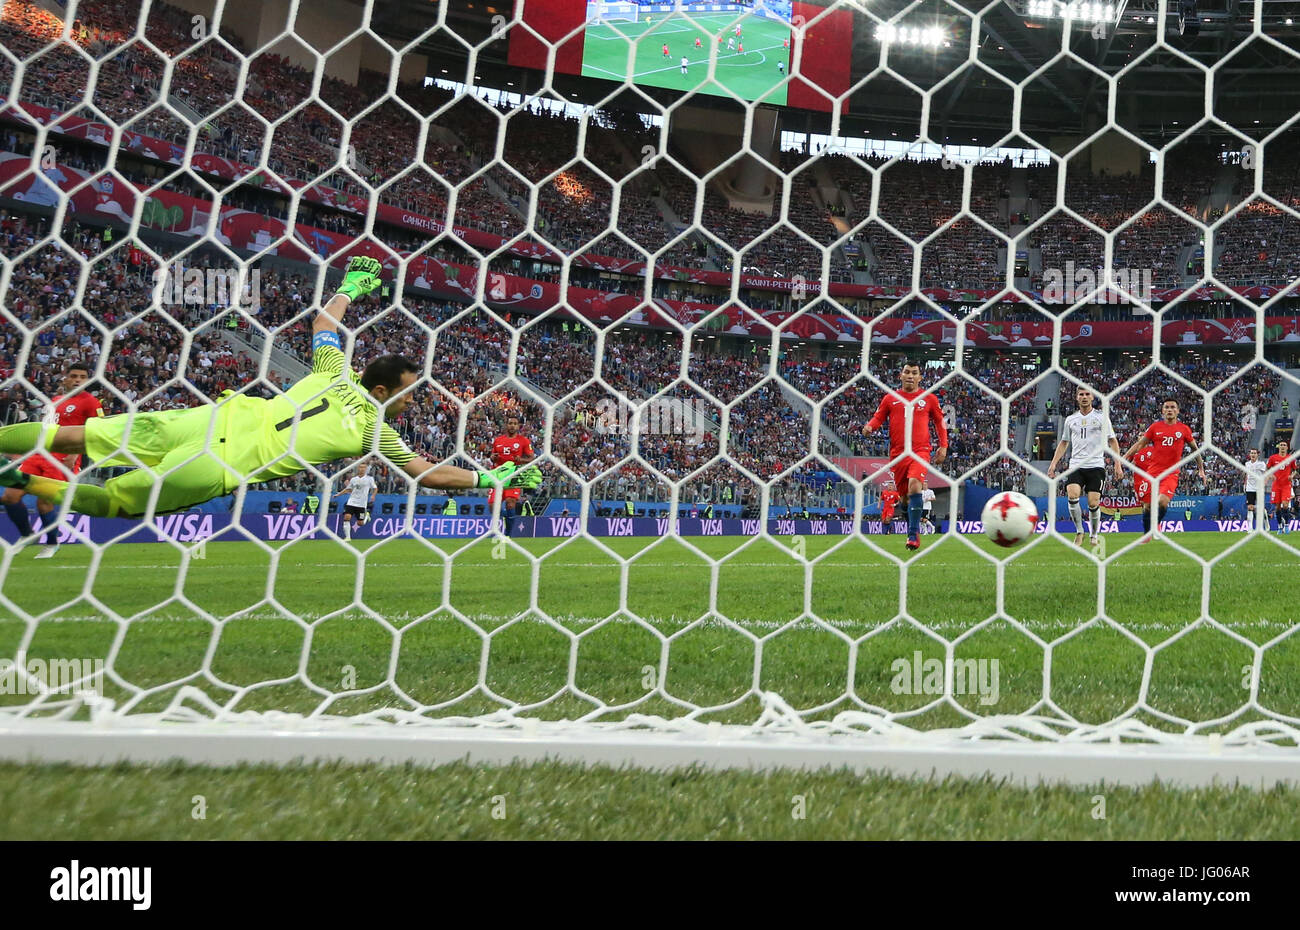 St. Petersburg, Russia. 2nd July, 2017. Claudio Bravo (L), goalie of Chile, saves during the final match between Chile and Germany at the 2017 FIFA Confederations Cup in St. Petersburg, Russia, on July 2, 2017. Germany claimed the title by defeating Chile with 1-0. Credit: Xu Zijian/Xinhua/Alamy Live News Stock Photo